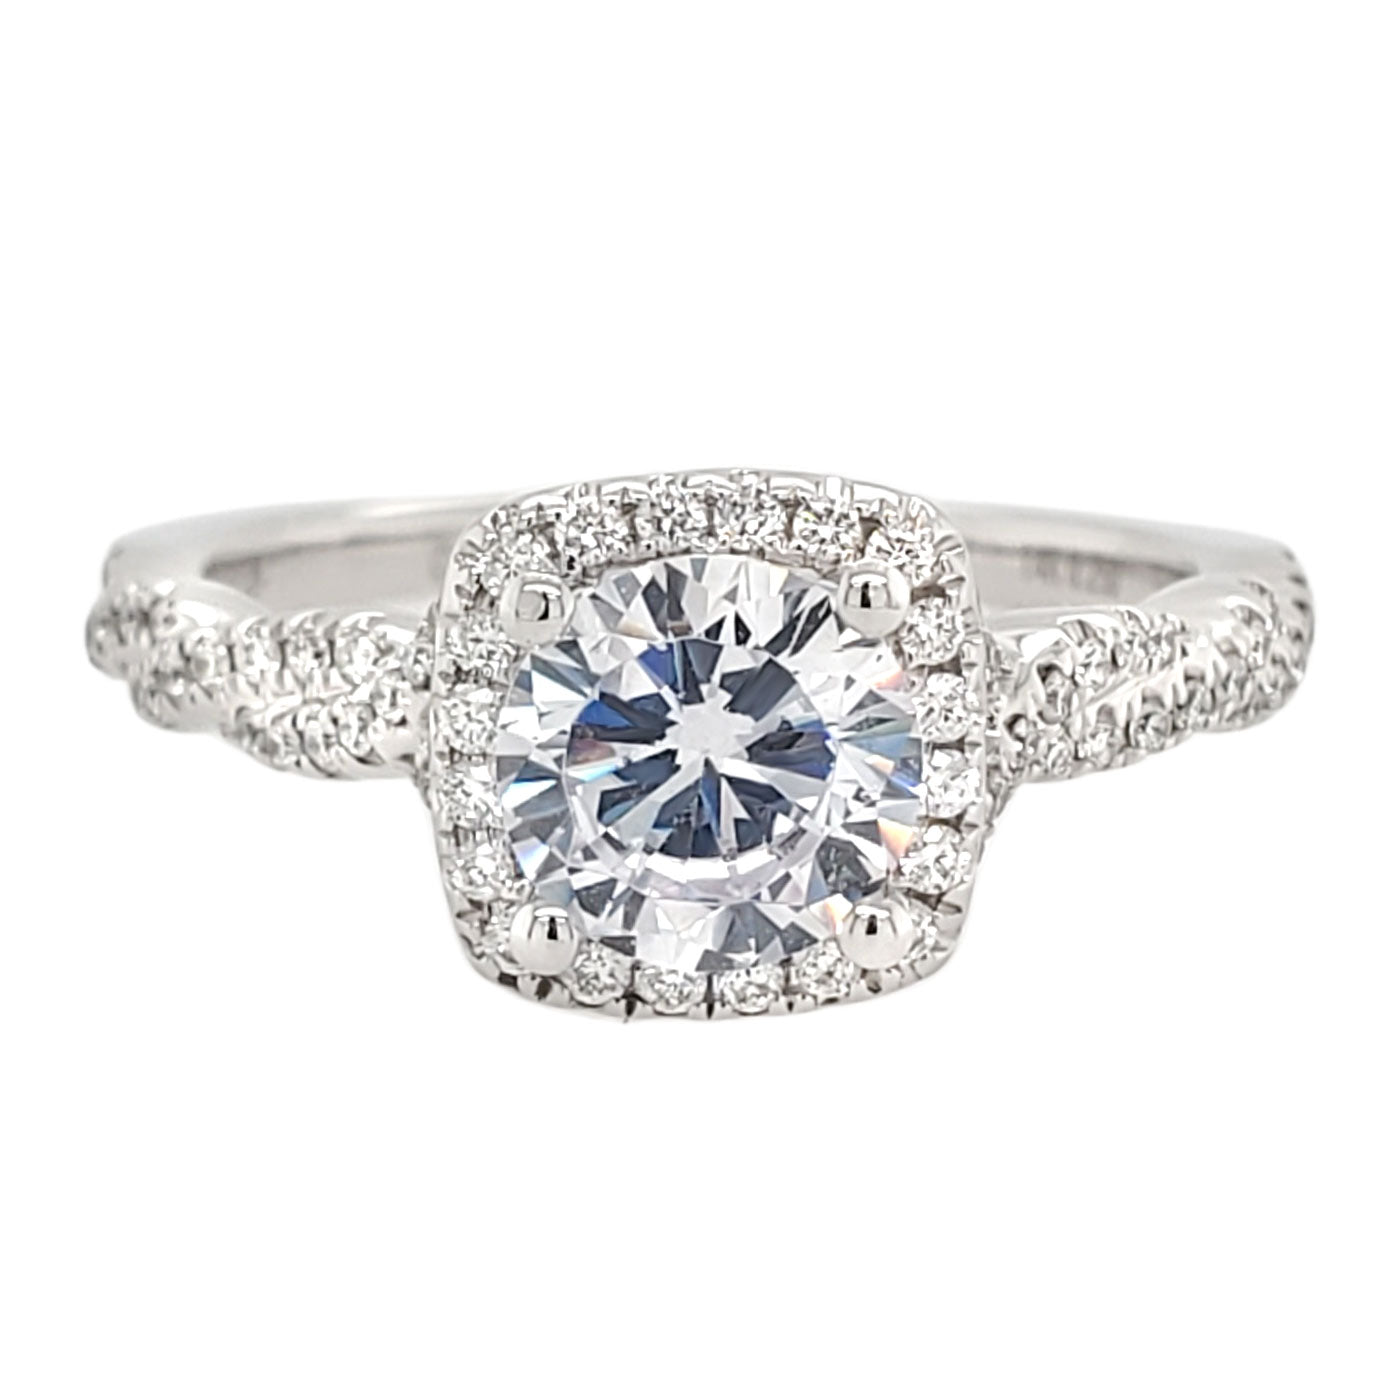 Glam and Bright Three Sided Pave Engagement Ring